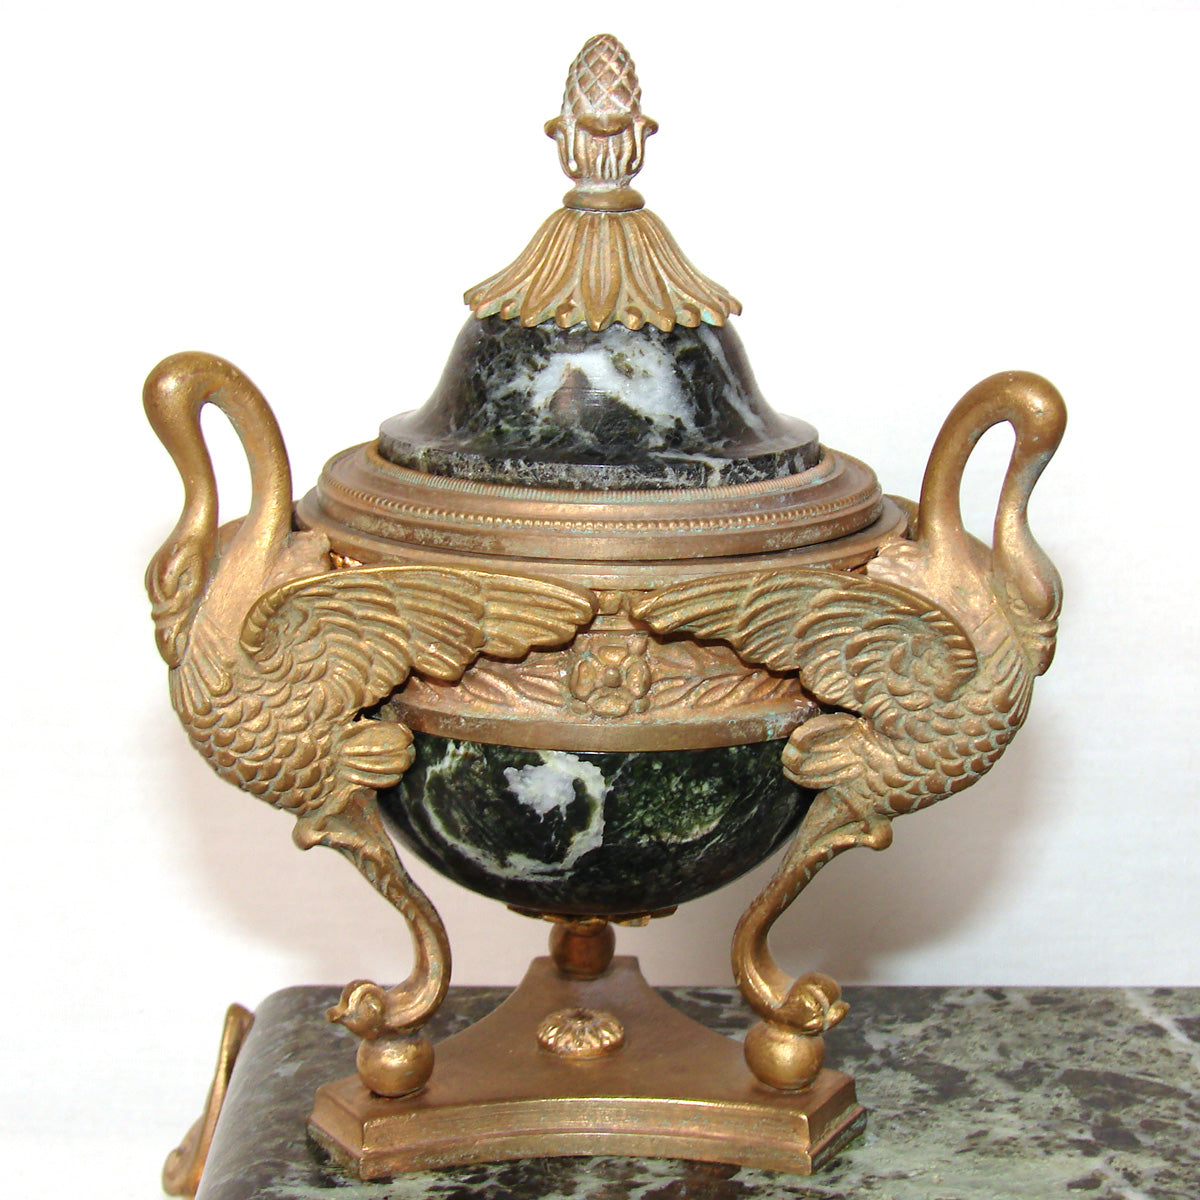 Huge Antique French 15" Writer's Stand, Double Inkwell, Empire Revival with Swans & Canova Marked Bust of Napoleon